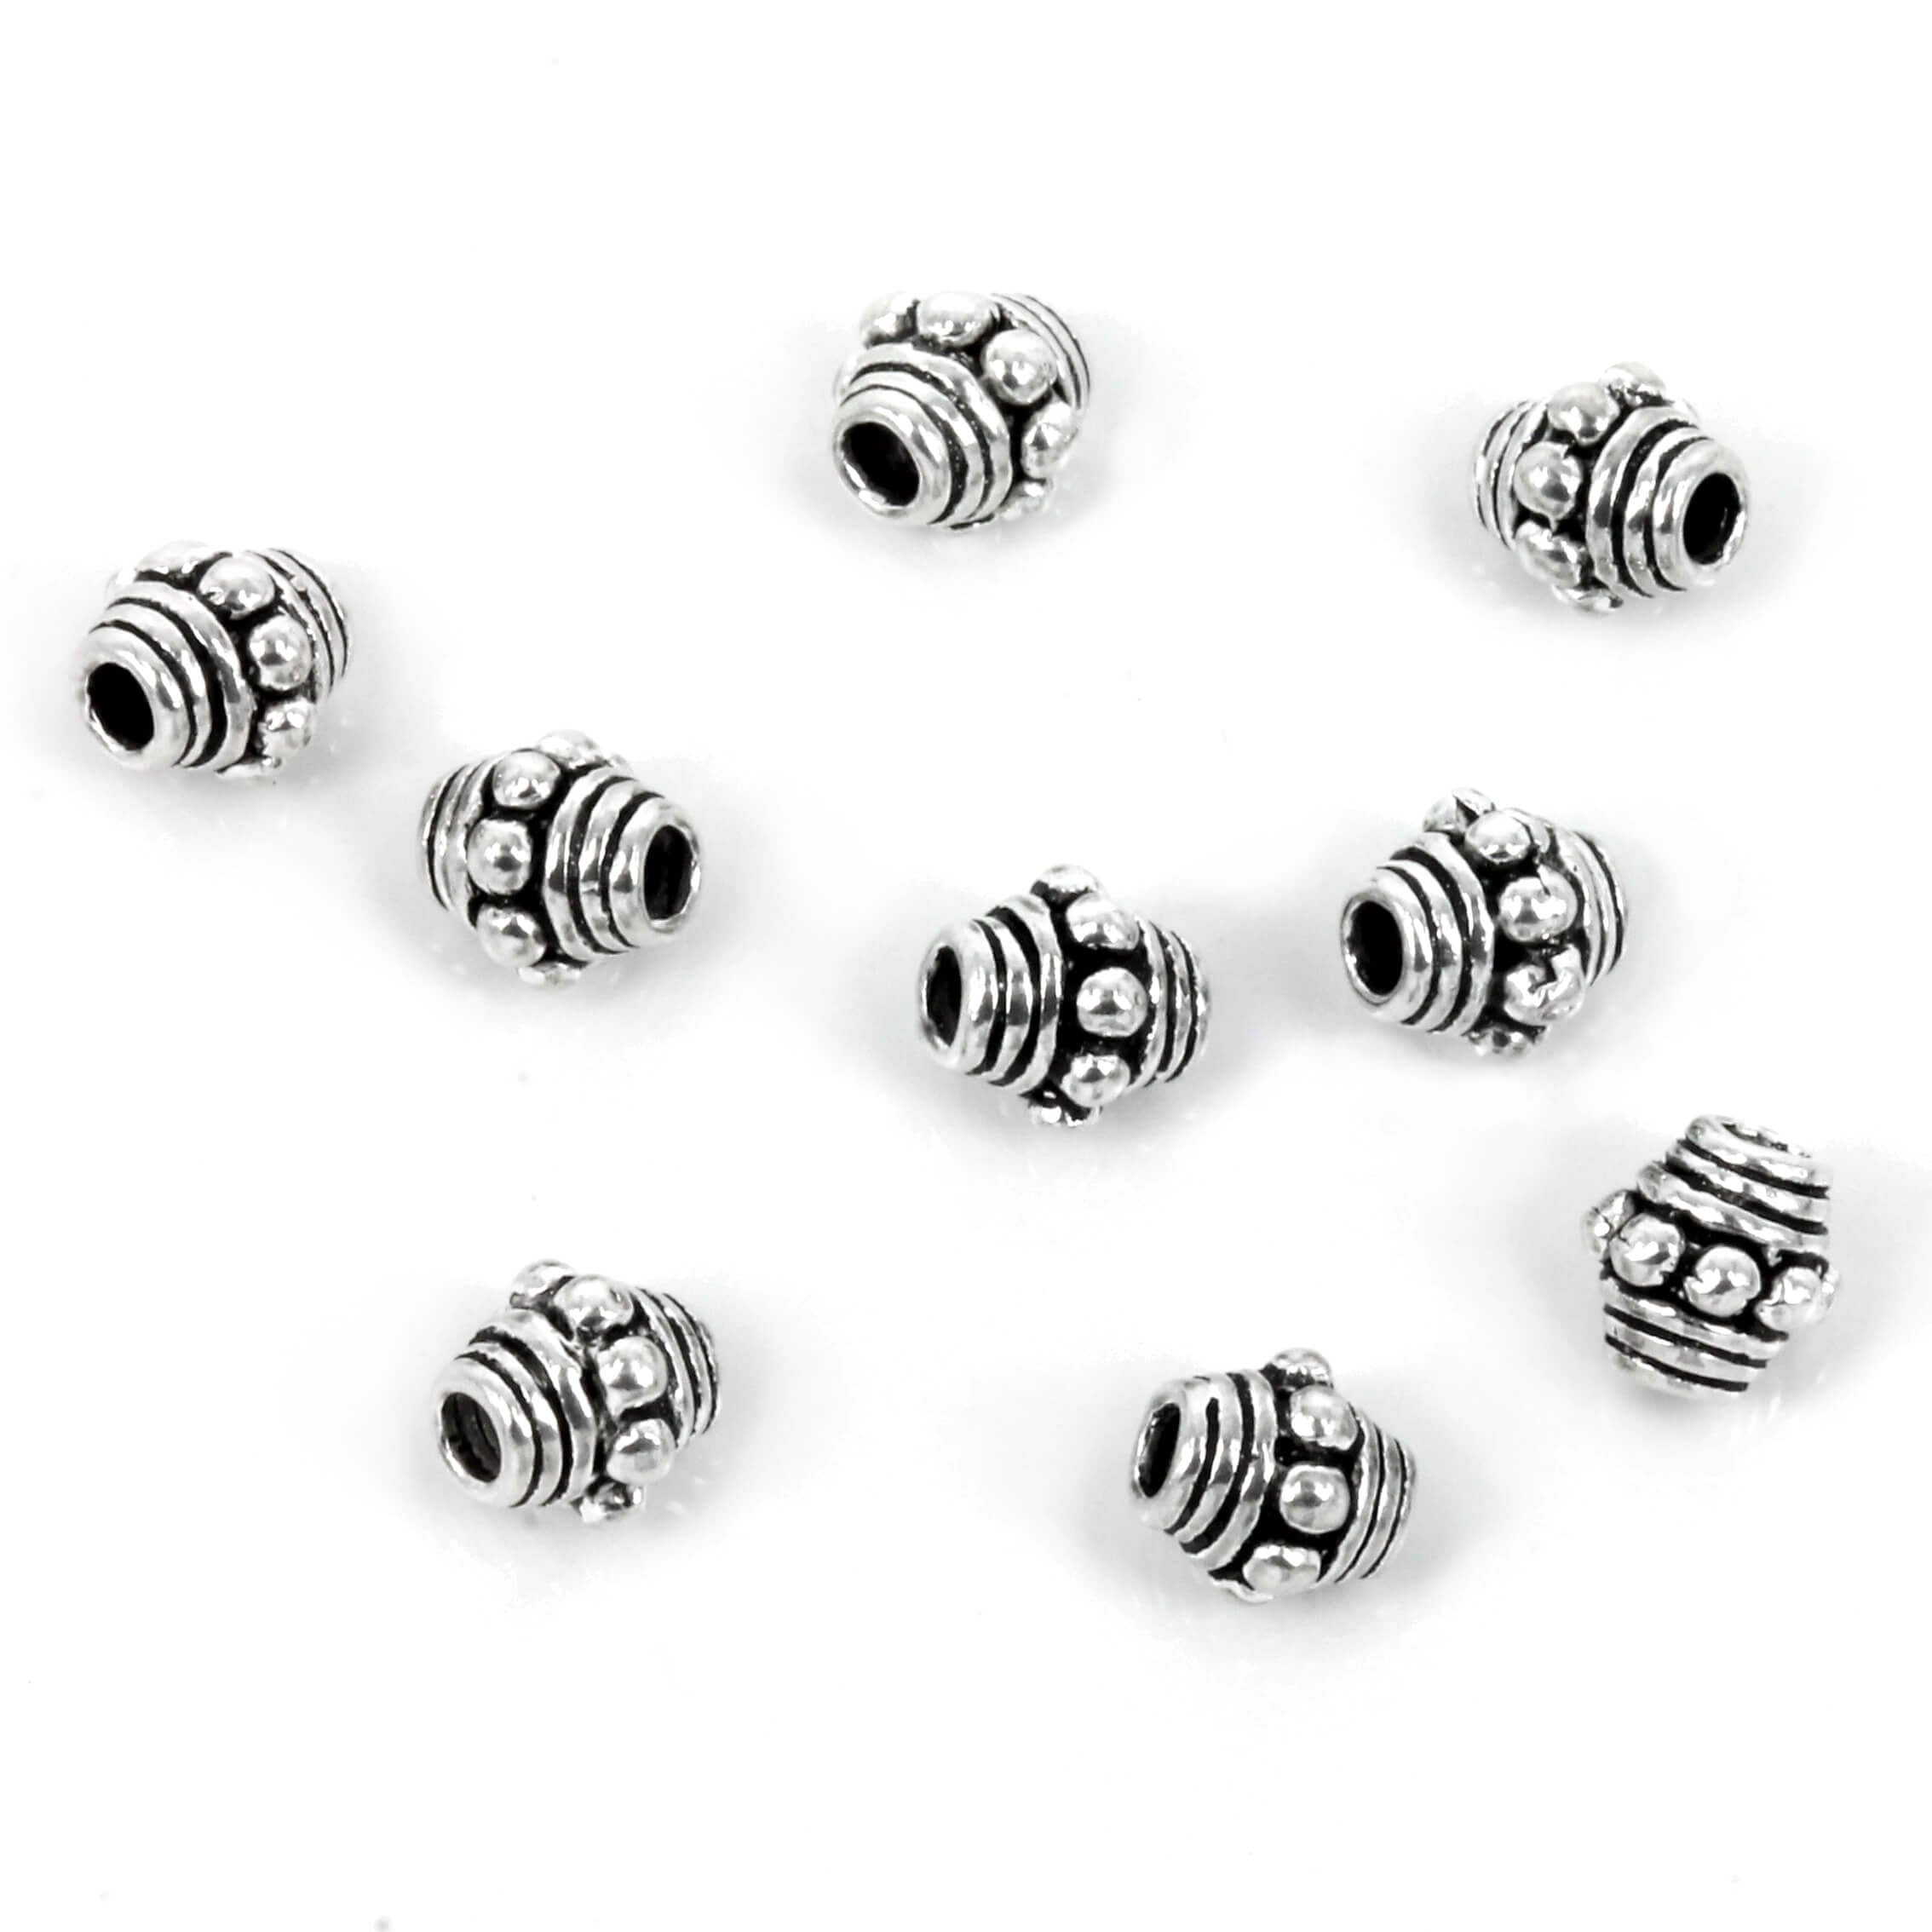 Bali-Style Bicone Bead in Sterling Silver 5x5mm